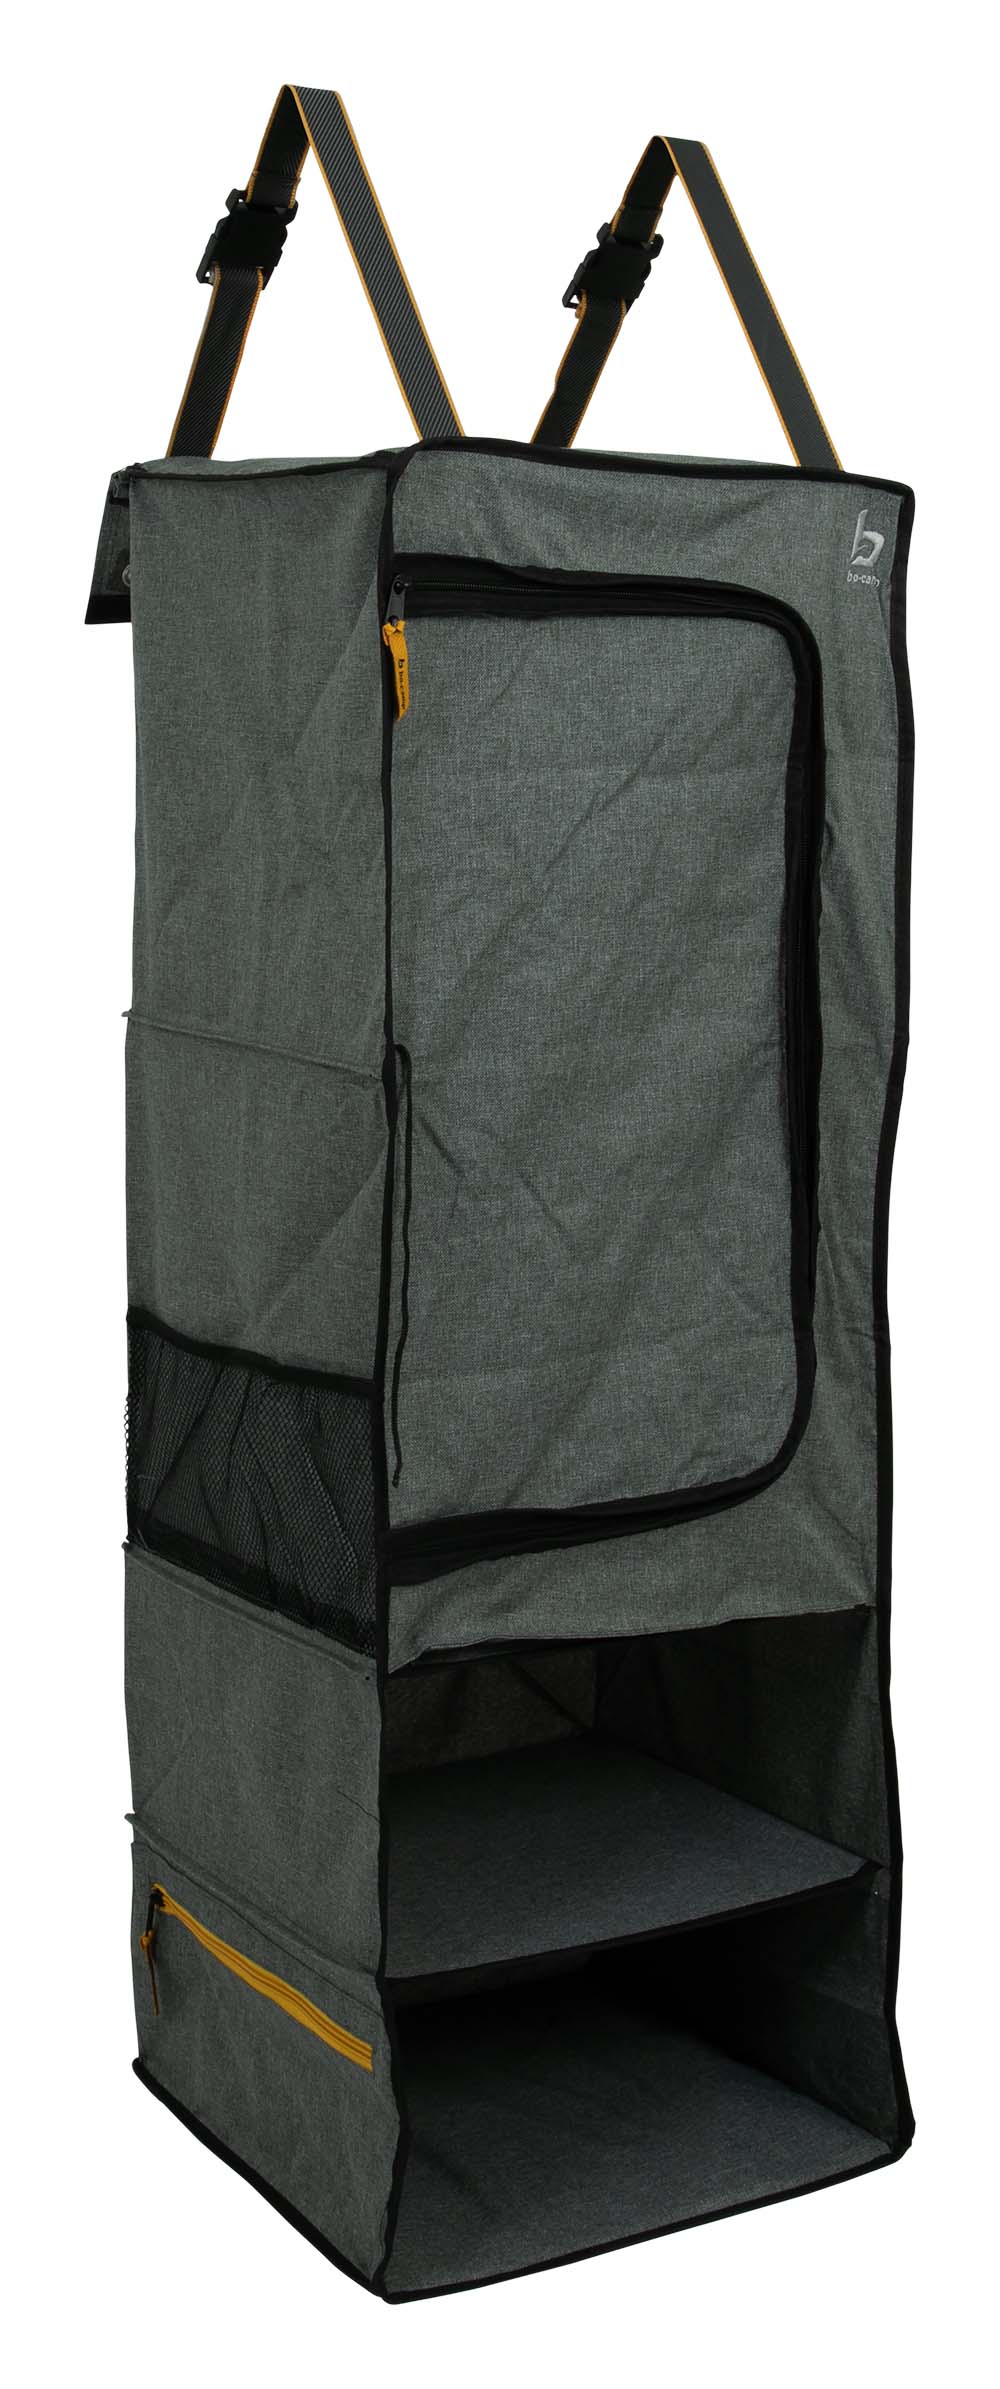 1709270 A 4 compartment hanging wardrobe from the Industrial collection. Has 4 spacious compartments.  The top 2 compartments can be closed with a roll-up door. Includes 2 mesh side pockets and 2 zippered side pockets. This organiser can be hung with straps to the tent pole. The loops at the bottom provide additional fixation. Made of extra sturdy Cationic.